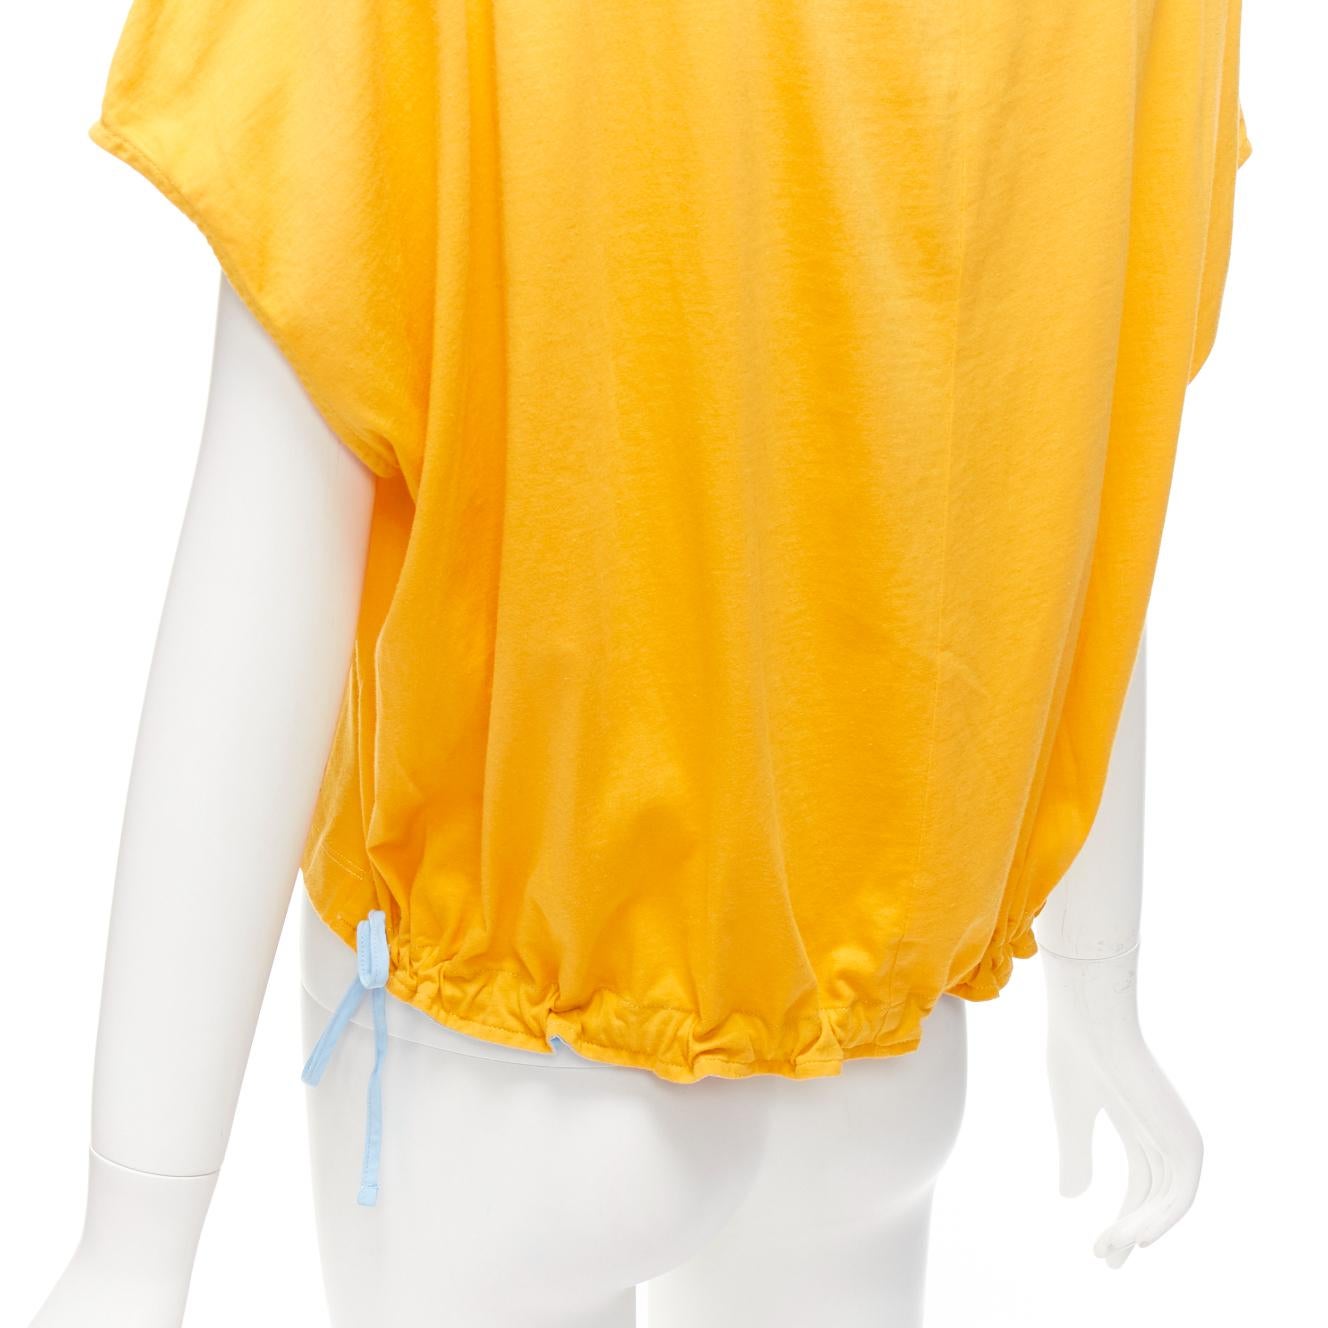 MARNI mango yellow cotton blue trim ruched sides cap sleeve t-shirt top IT38 XS
Reference: CELG/A00414
Brand: Marni
Material: Cotton
Color: Yellow, Blue
Pattern: Solid
Closure: Self Tie
Extra Details: Self tie sides hem.
Made in: